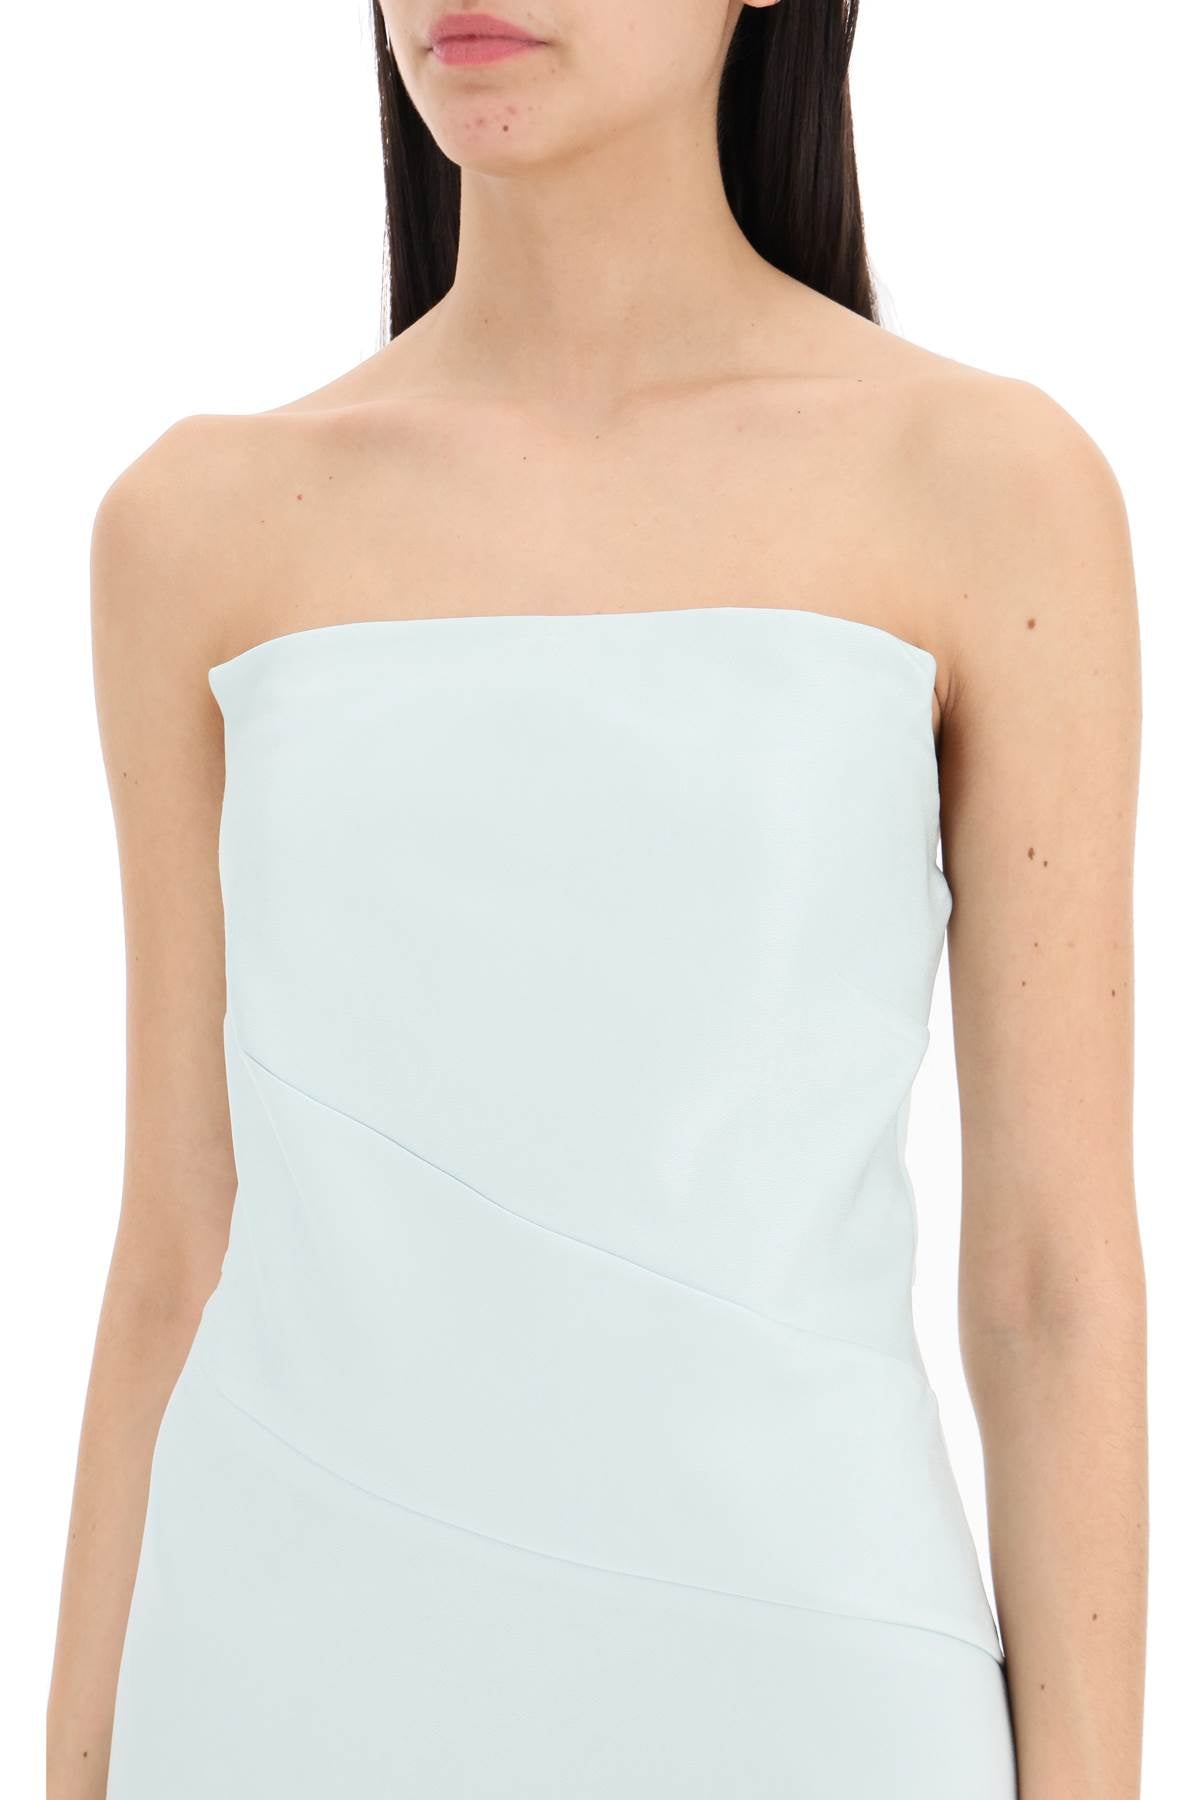 Roland mouret strapless midi dress without-3